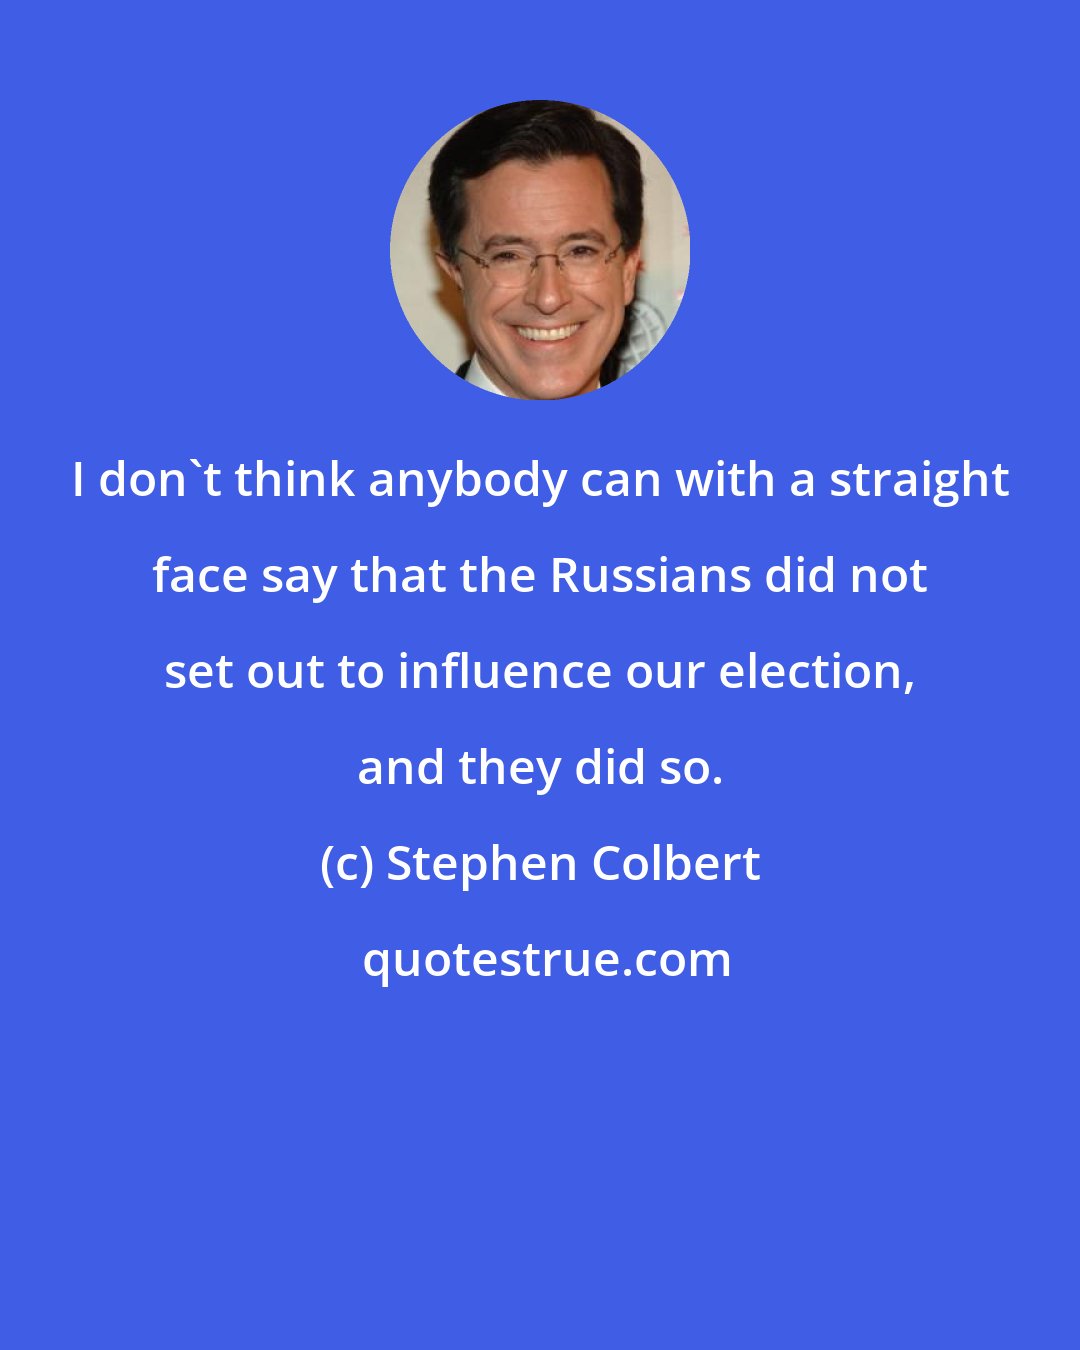 Stephen Colbert: I don't think anybody can with a straight face say that the Russians did not set out to influence our election, and they did so.